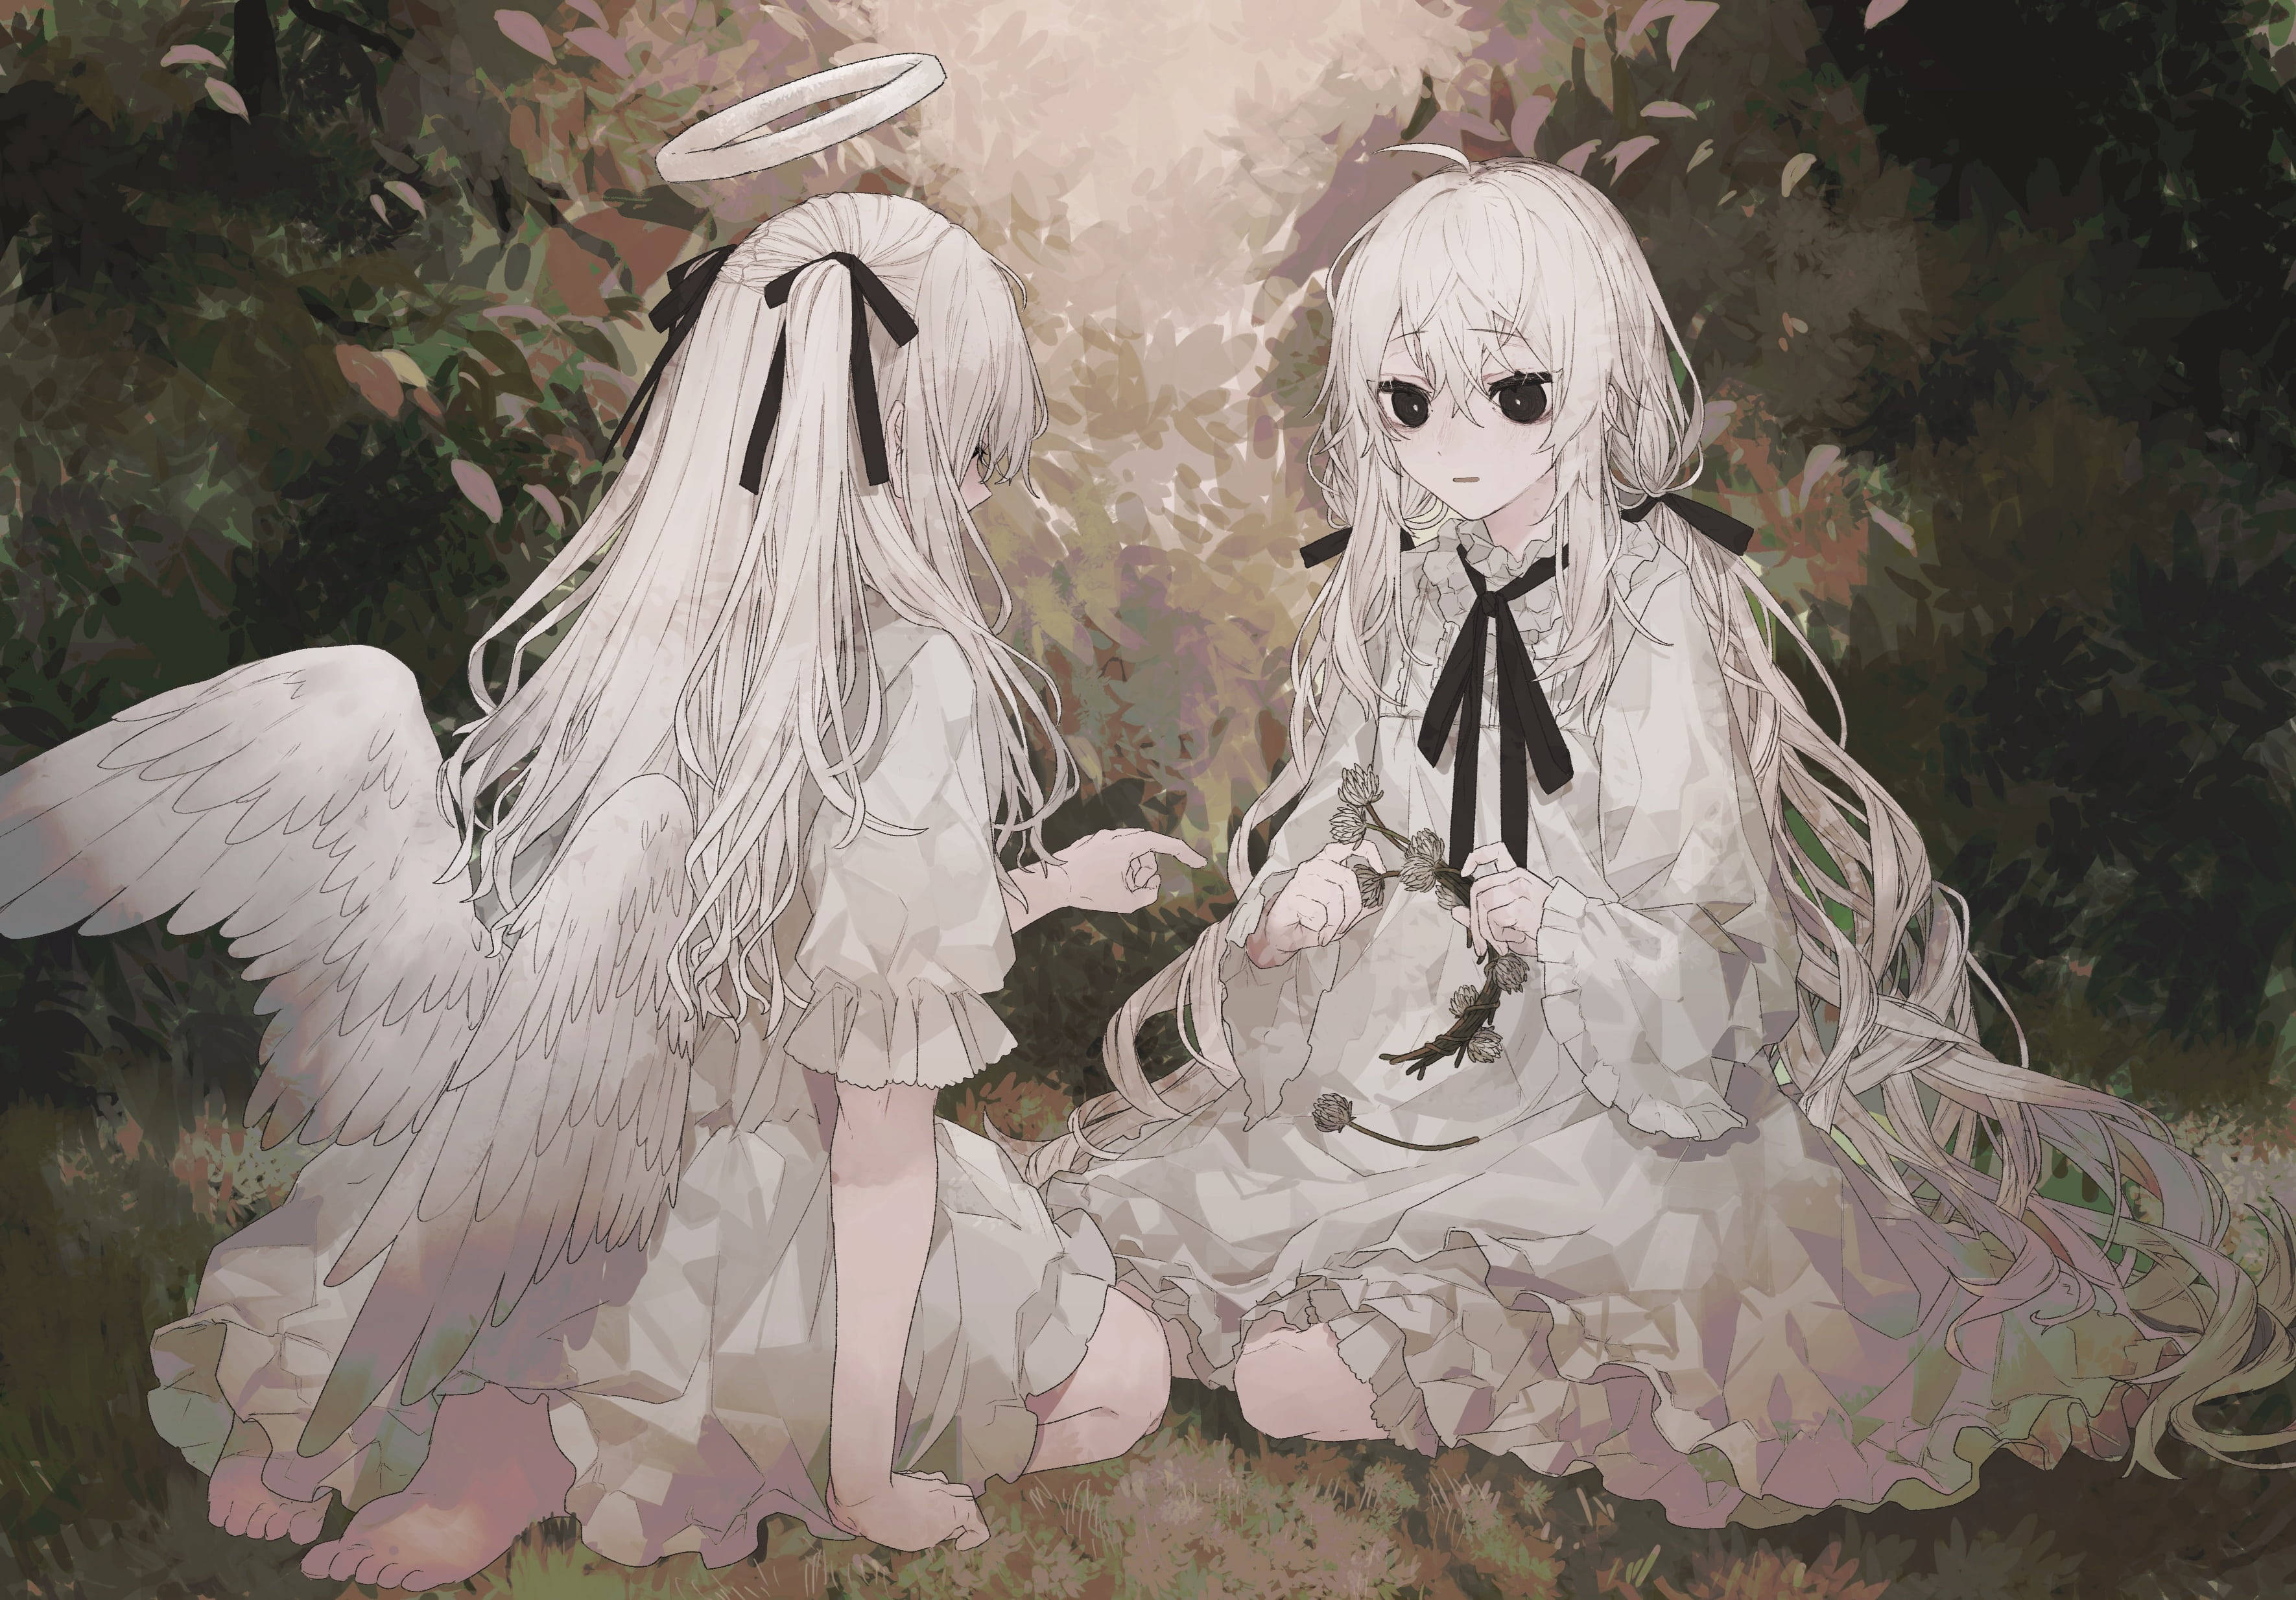 Sad Anime Girl Black And White With Friend Wallpaper